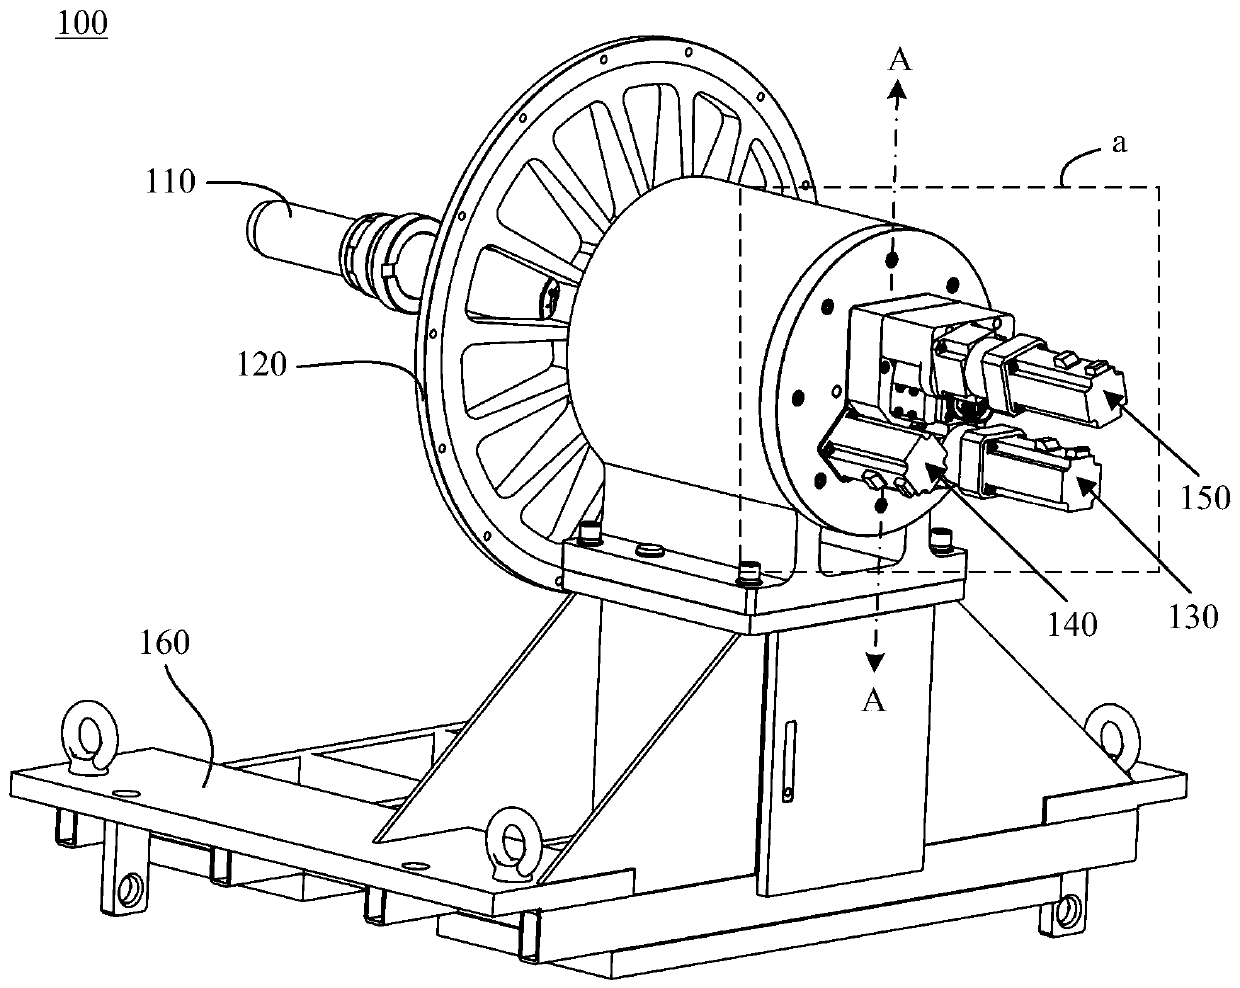 A low-pressure turbine installation device and its use method